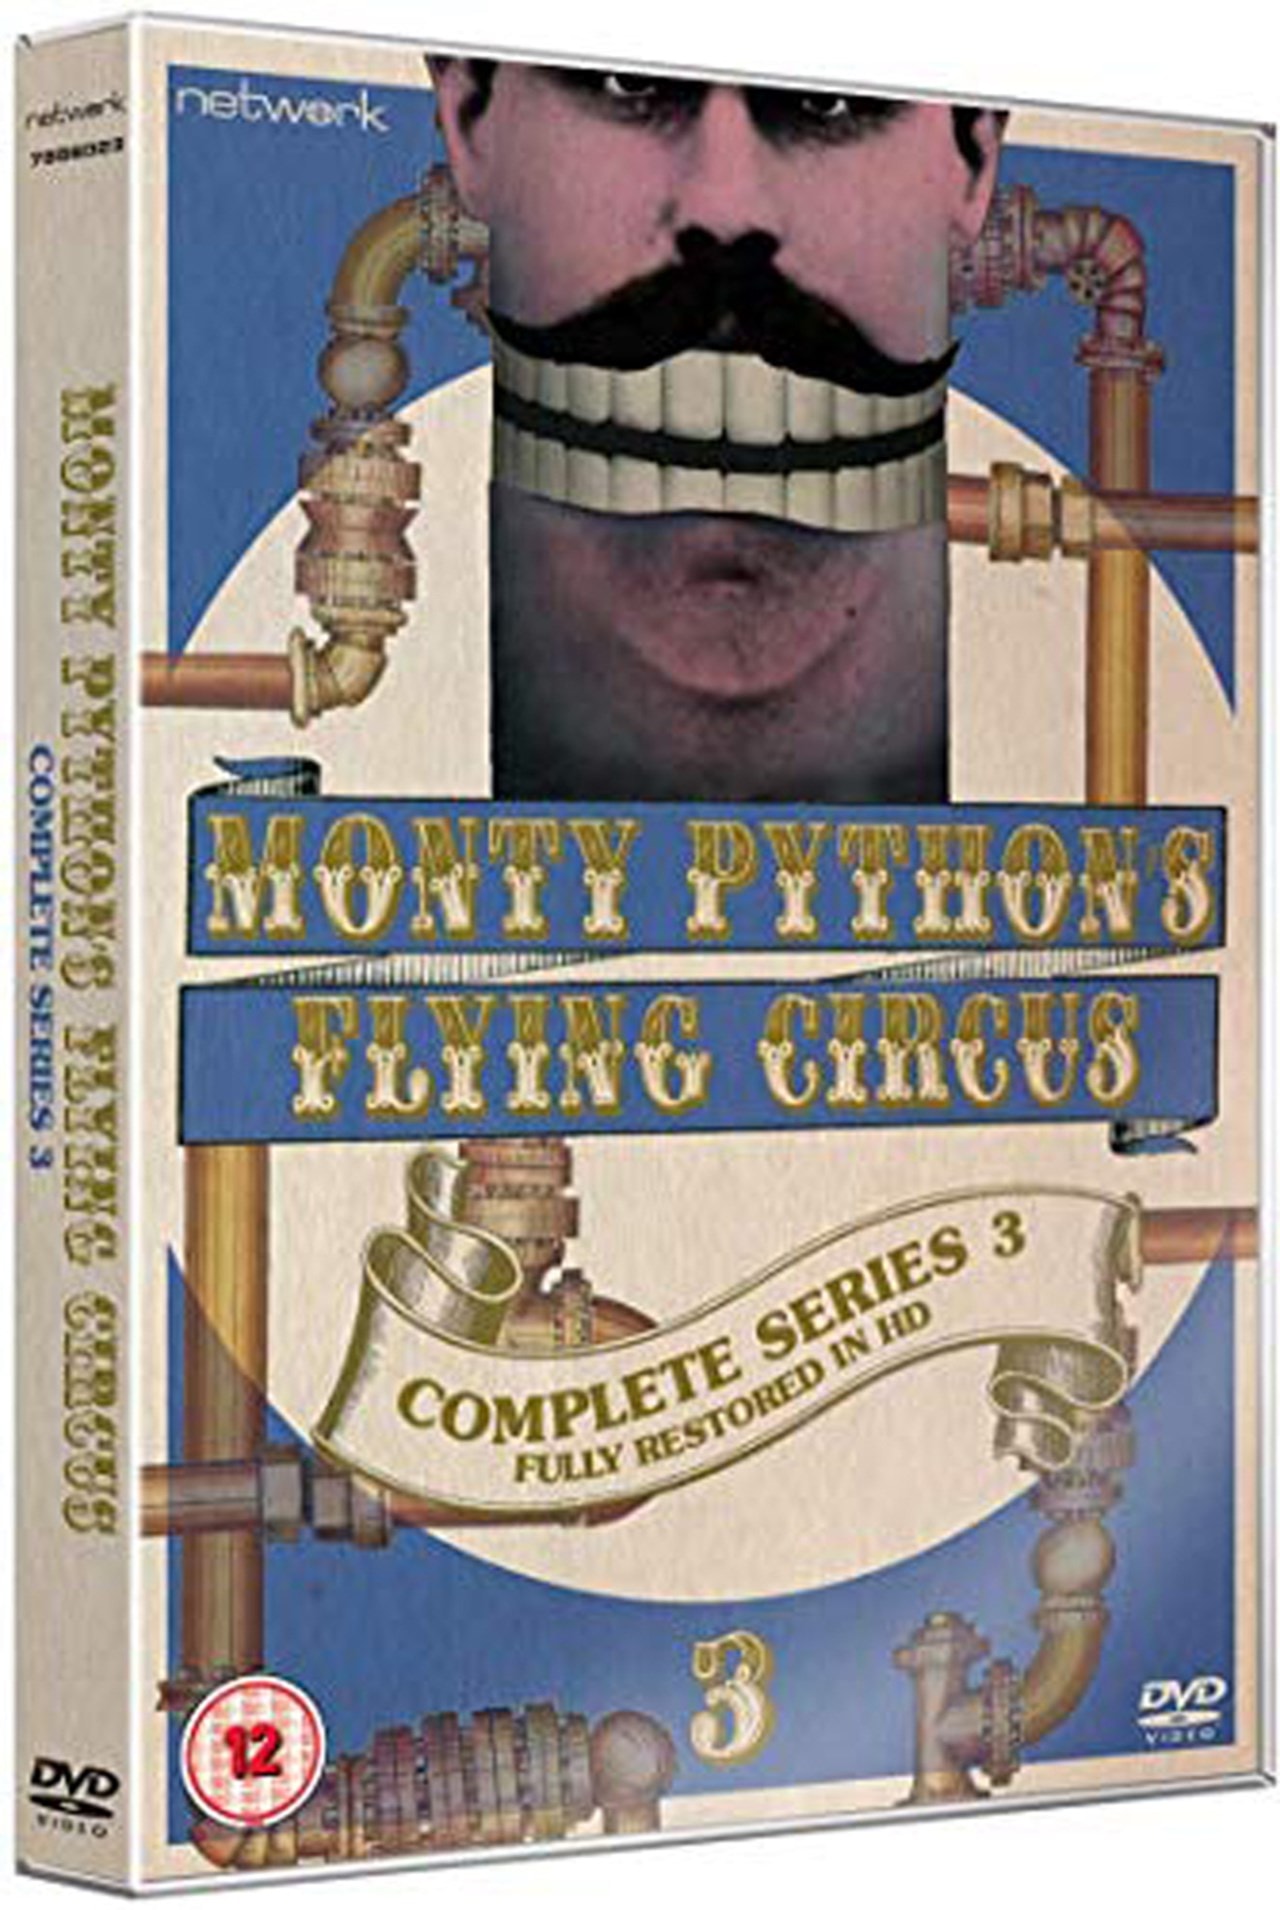 Monty Python S Flying Circus The Complete Series 3 Dvd Box Set Free Shipping Over £20 Hmv